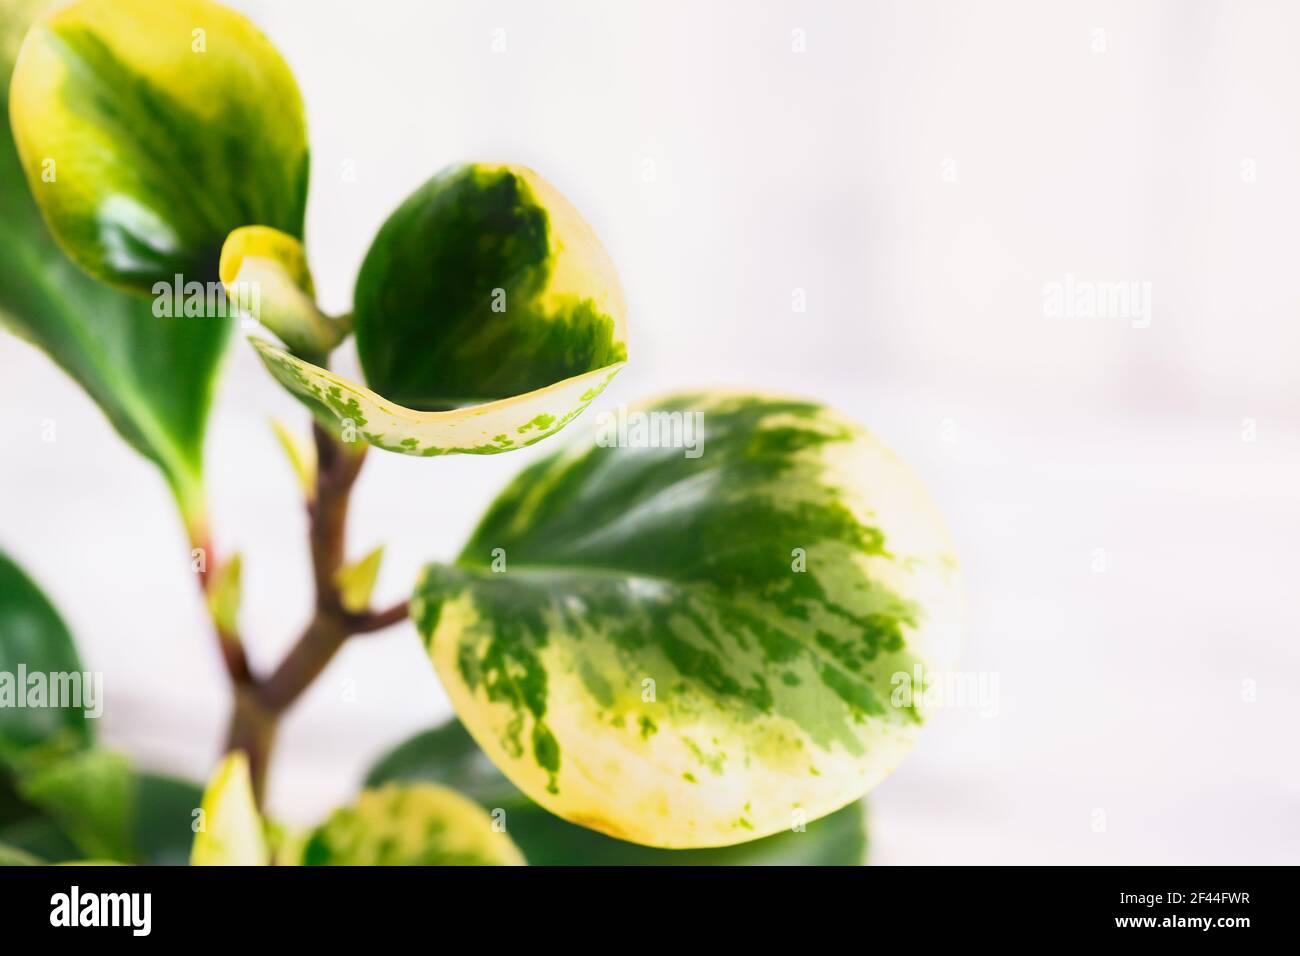 Abstract of a Peperomia Obtusifolia Variegata, Variegated Baby Rubber Plant or Radiator plant. Selective focus with blurred background. Stock Photo